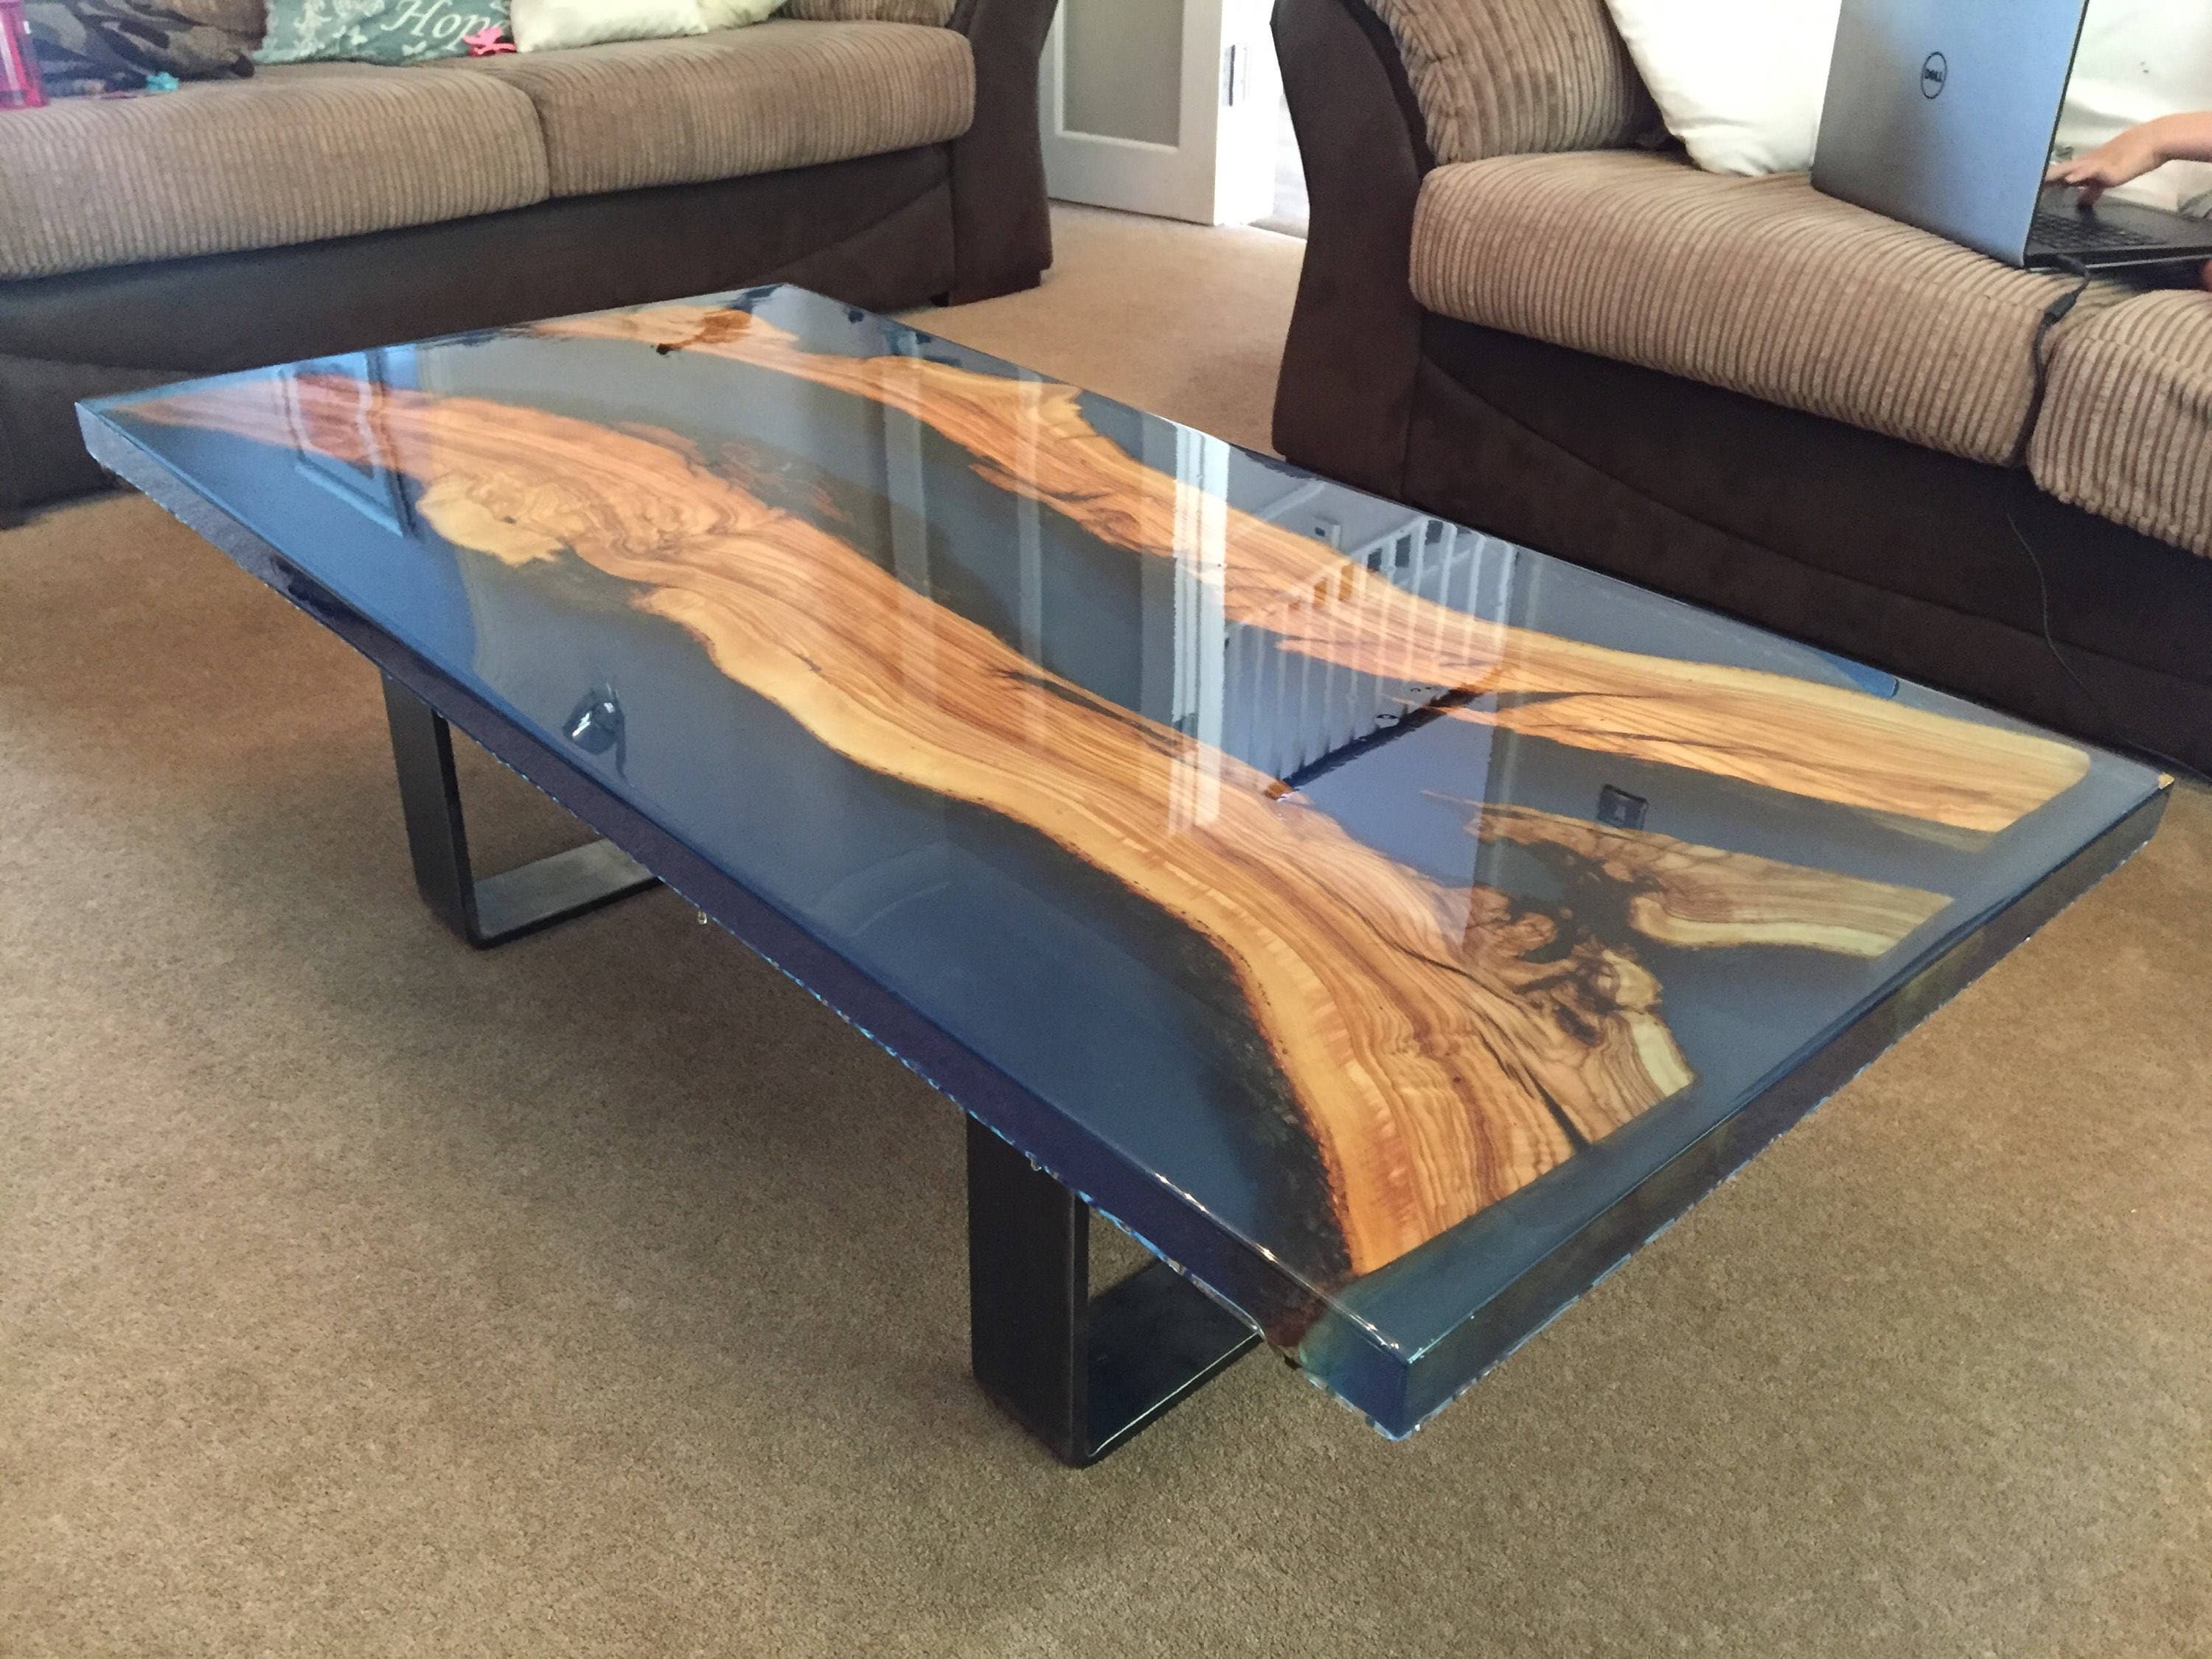 Stunning epoxy resin and olive wood inset coffee table